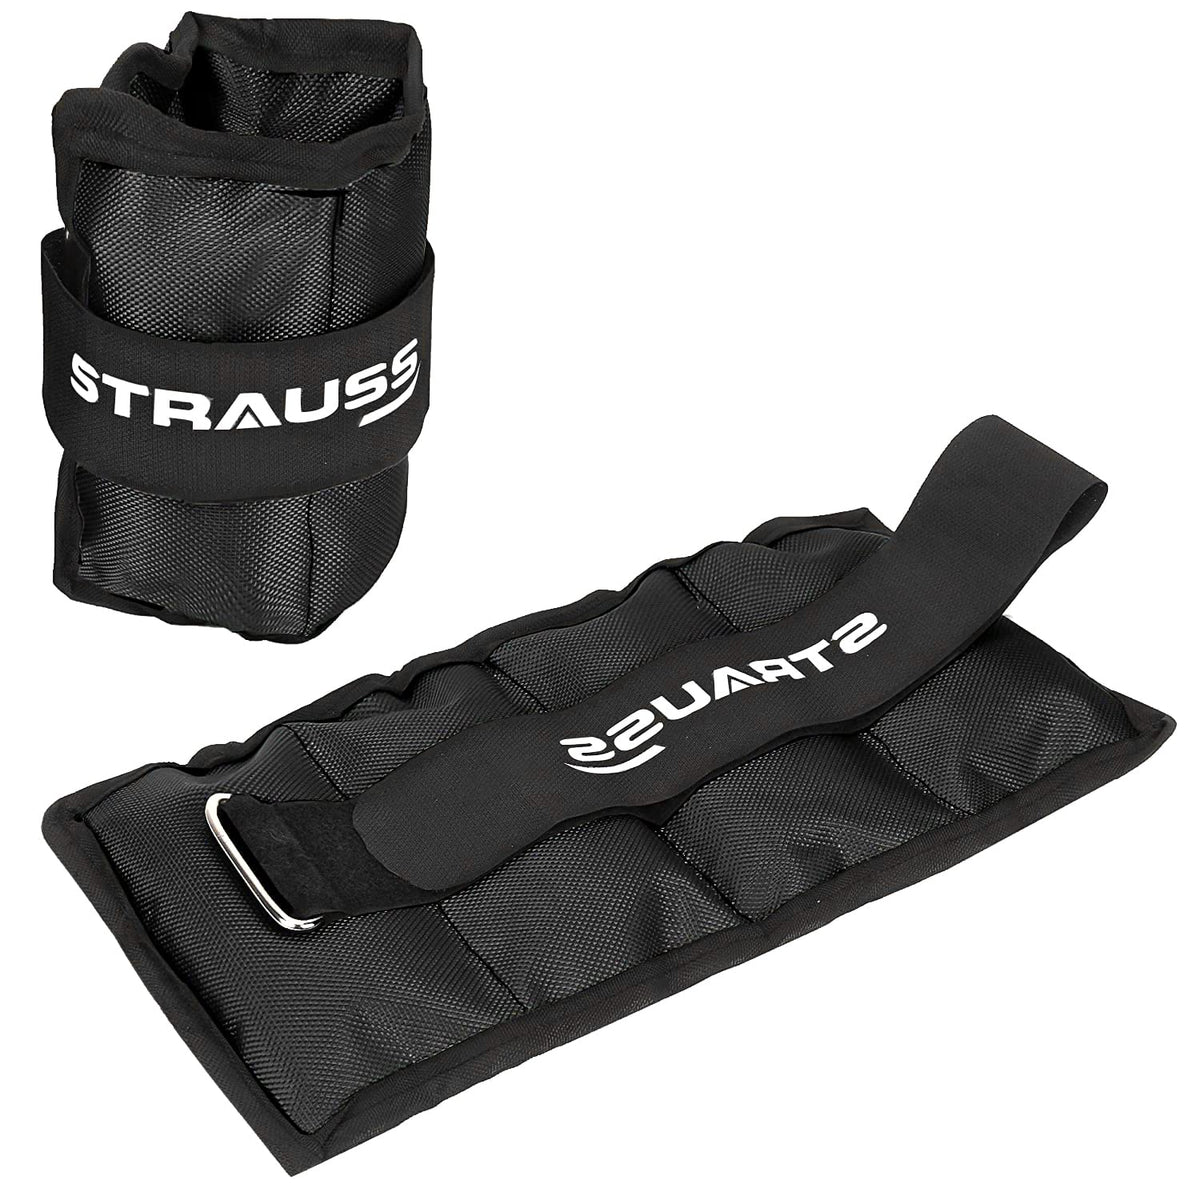 Strauss Adjustable Ankle/Wrist Weights 0.5 KG X 2 | Ideal for Walking, Running, Jogging, Cycling, Gym, Workout & Strength Training | Easy to Use on Ankle, Wrist, Leg, (Black)